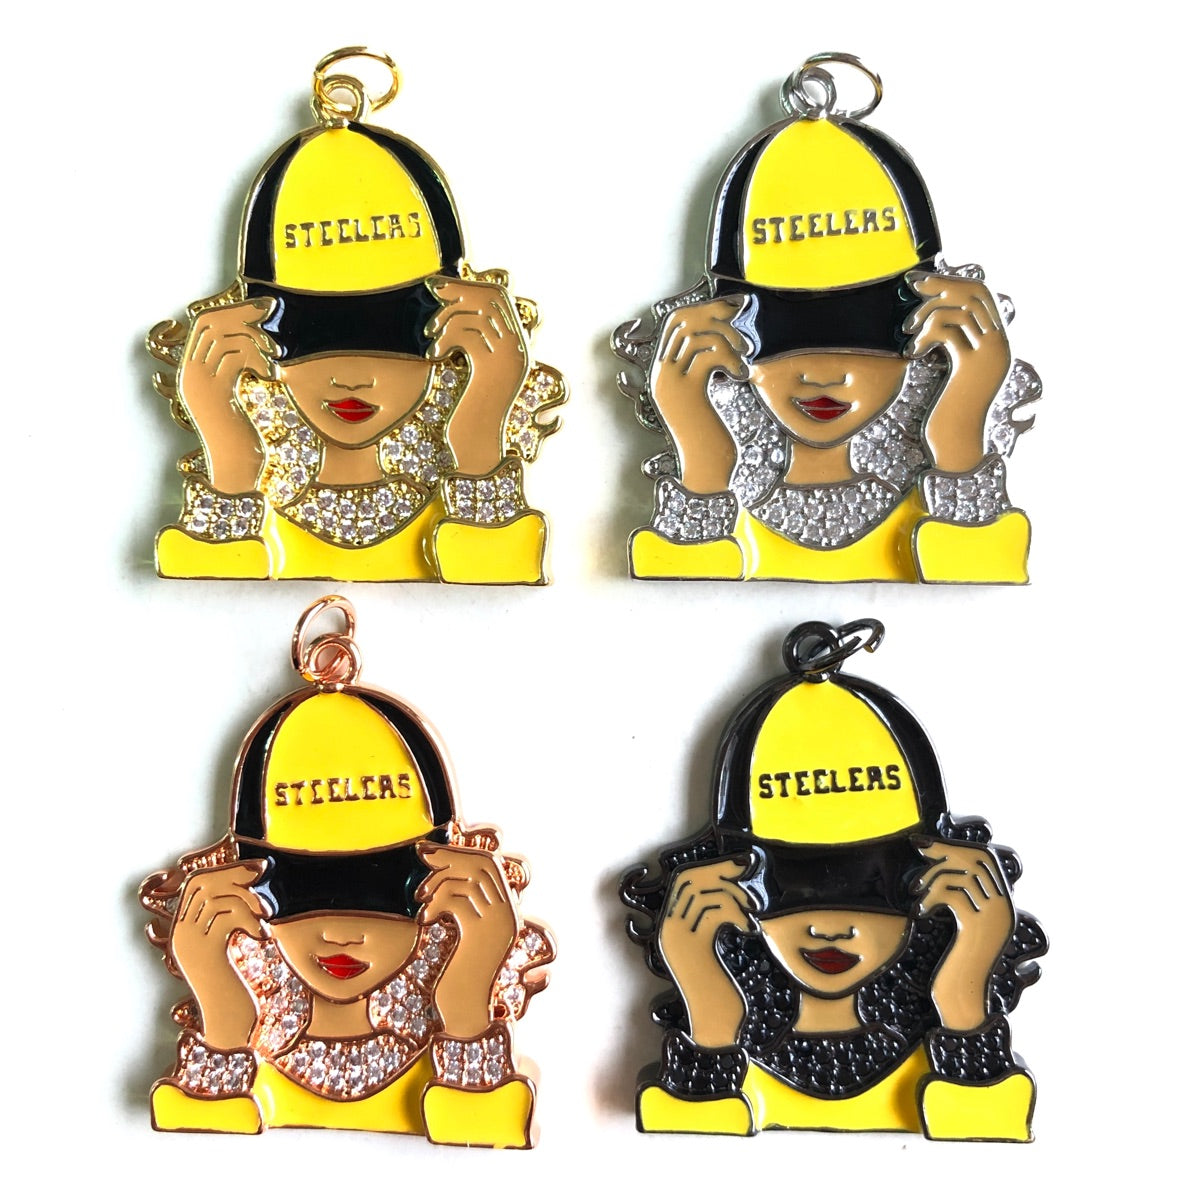 10pcs/lot CZ Paved Pittsburgh Steelers Afro Black Girl Charms Mix Colors CZ Paved Charms Afro Girl/Queen Charms American Football Sports New Charms Arrivals Charms Beads Beyond